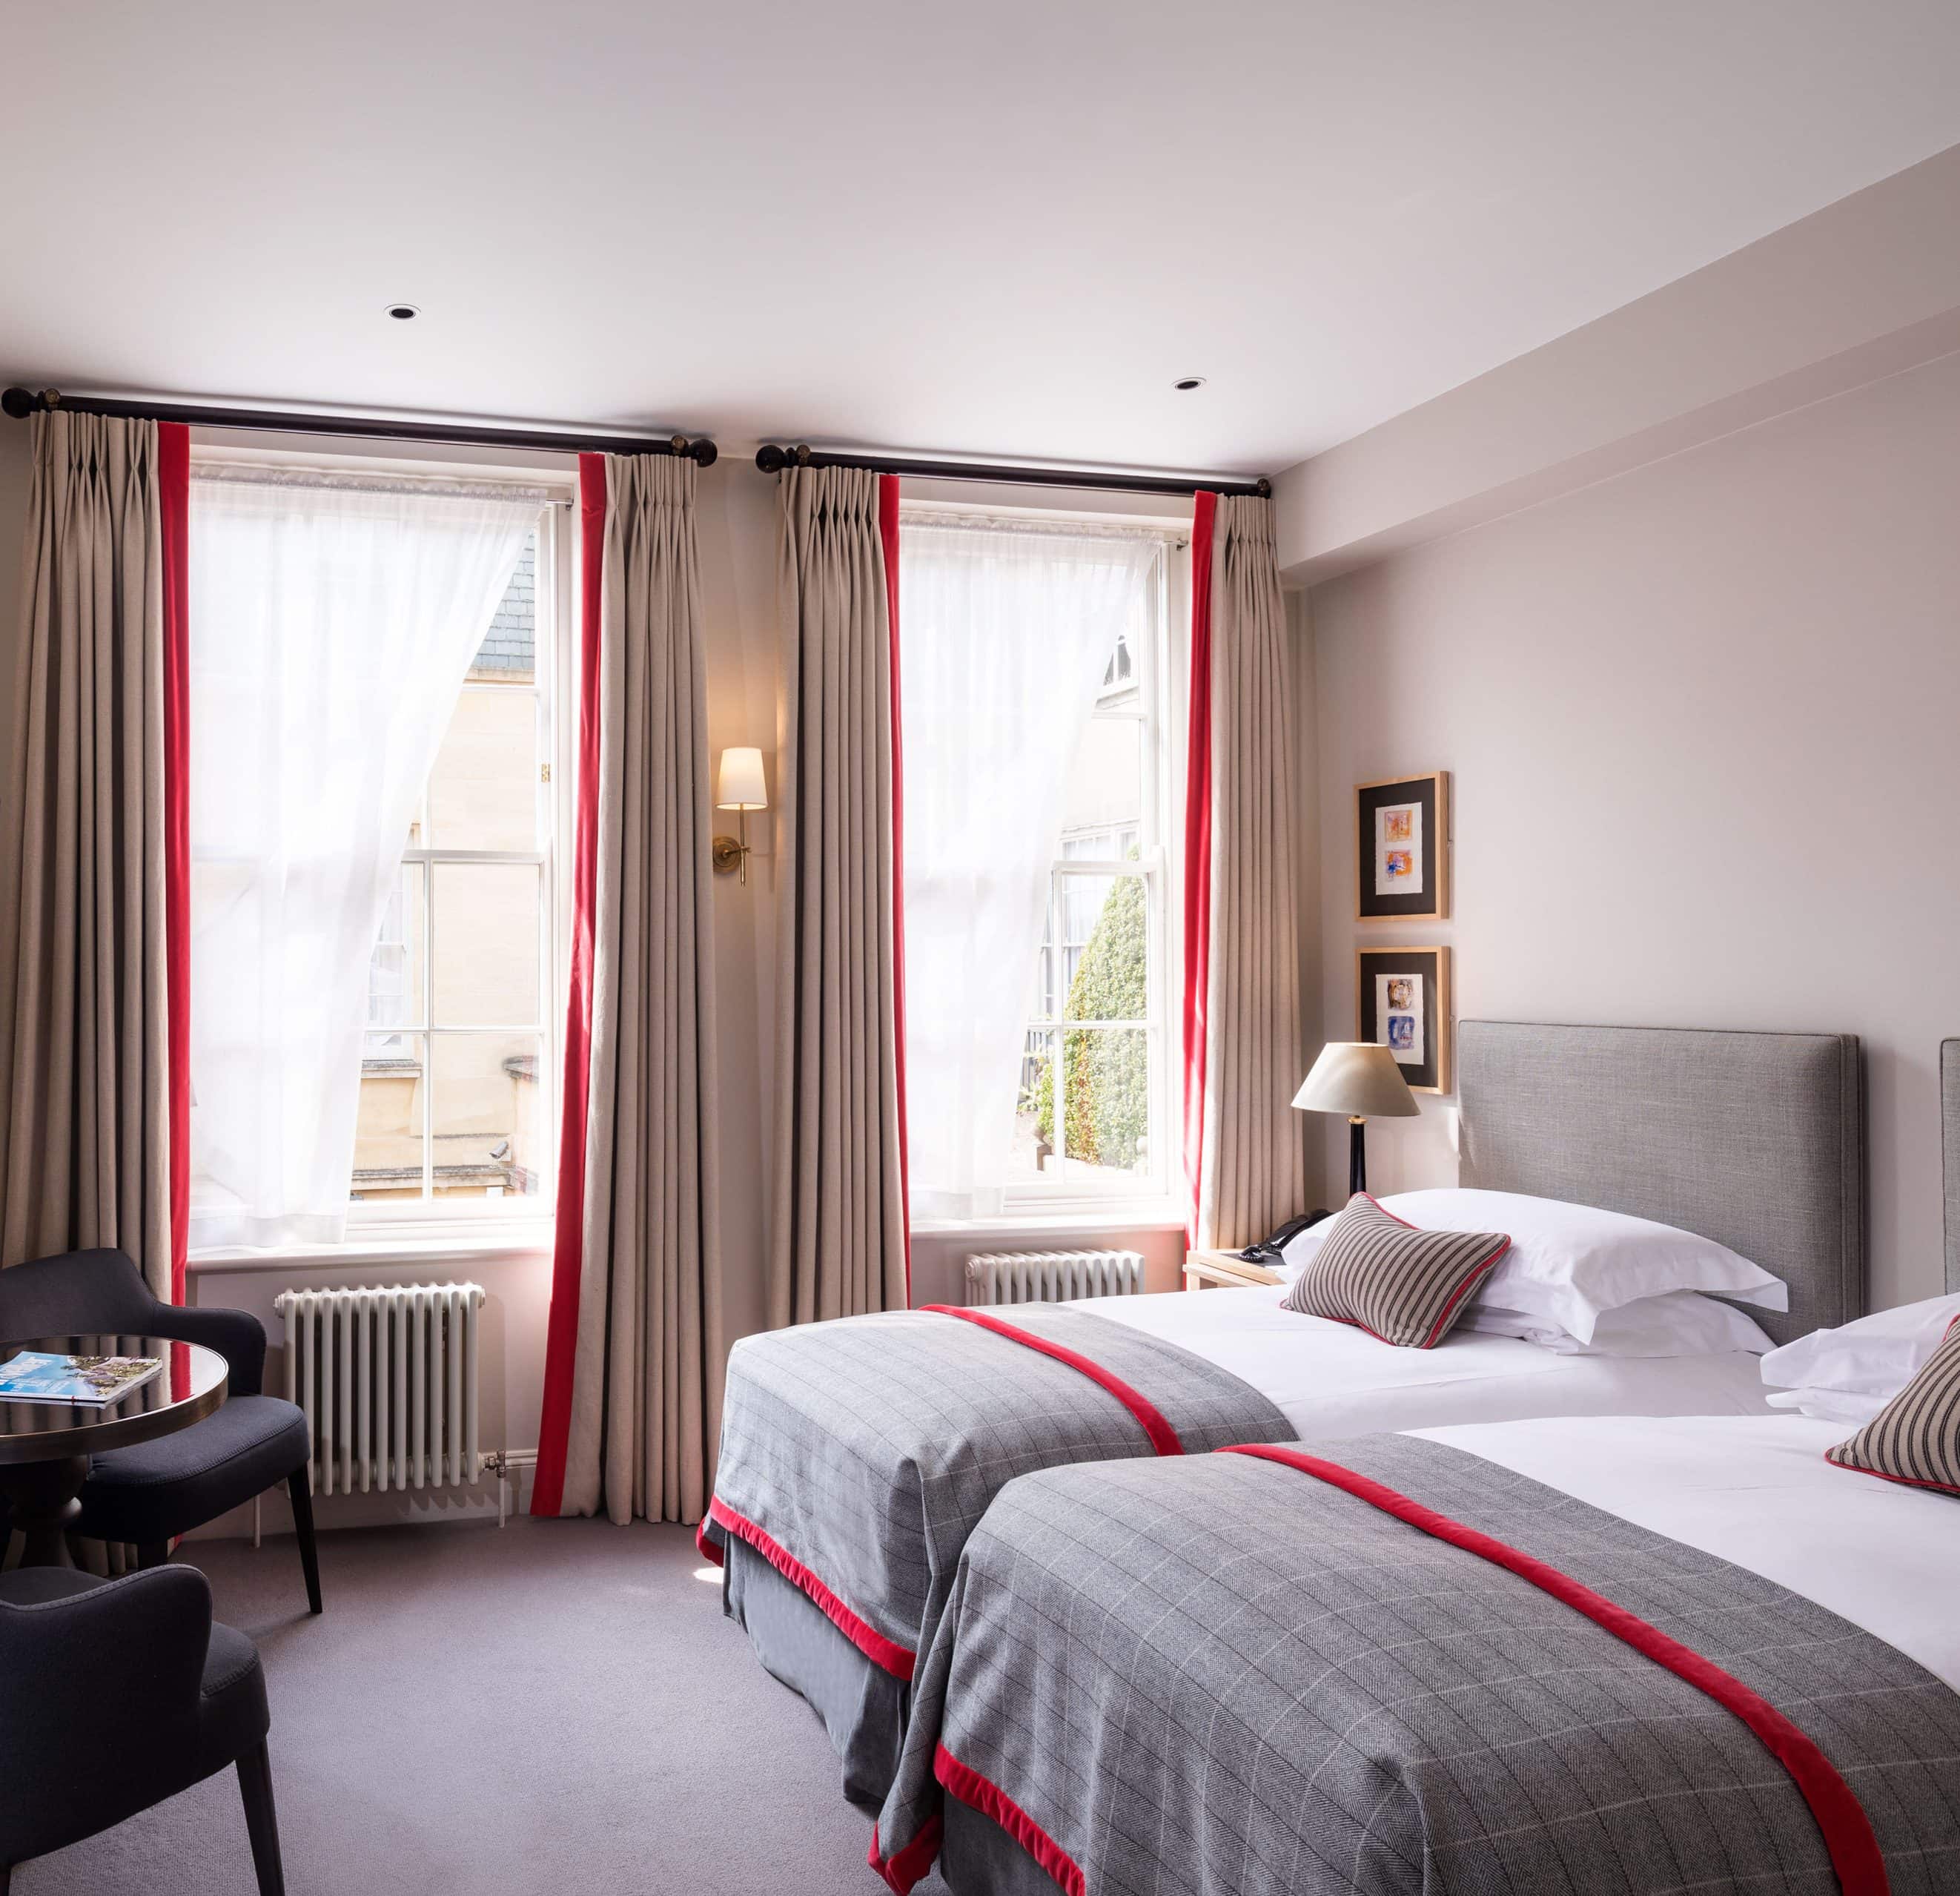 0004-2019-Old-Bank-Hotel-Oxford-High-Res-Bedroom-Modern-Windows-High-Street-View-Web-Hero-aspect-ratio-2644-2557